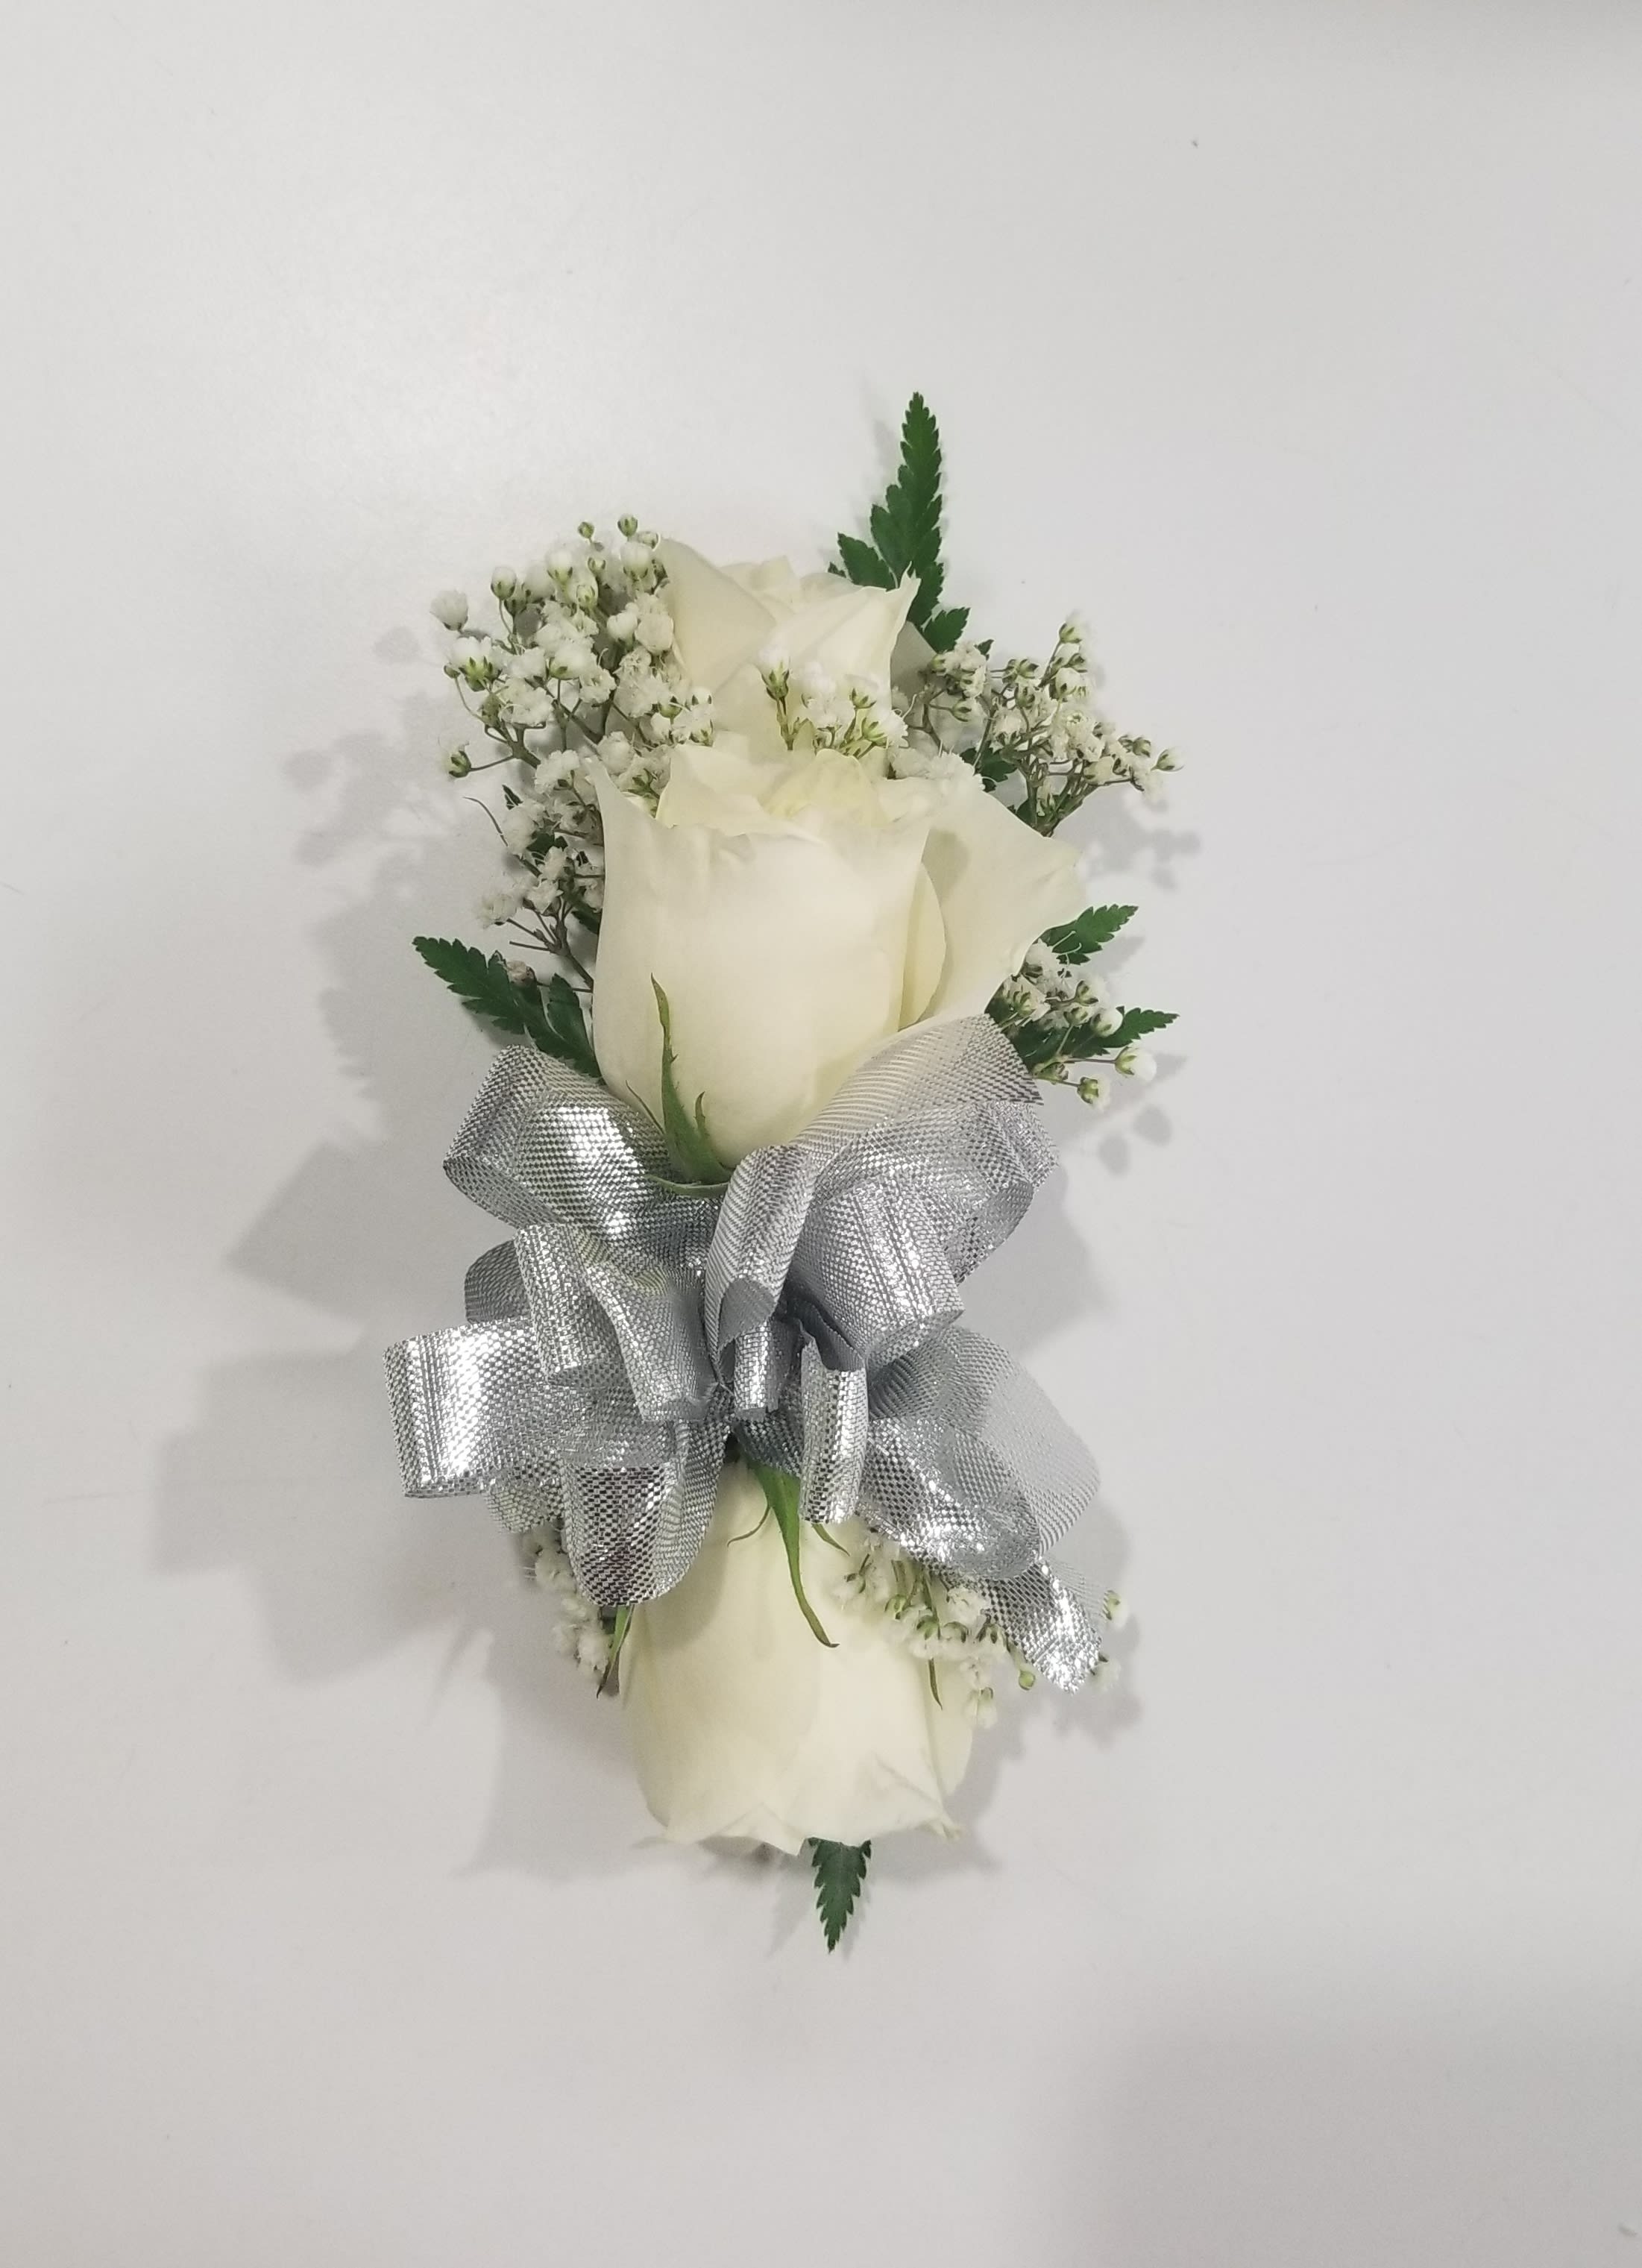 White Rose Wrist Corsage with Silver Bow in Philadelphia, PA